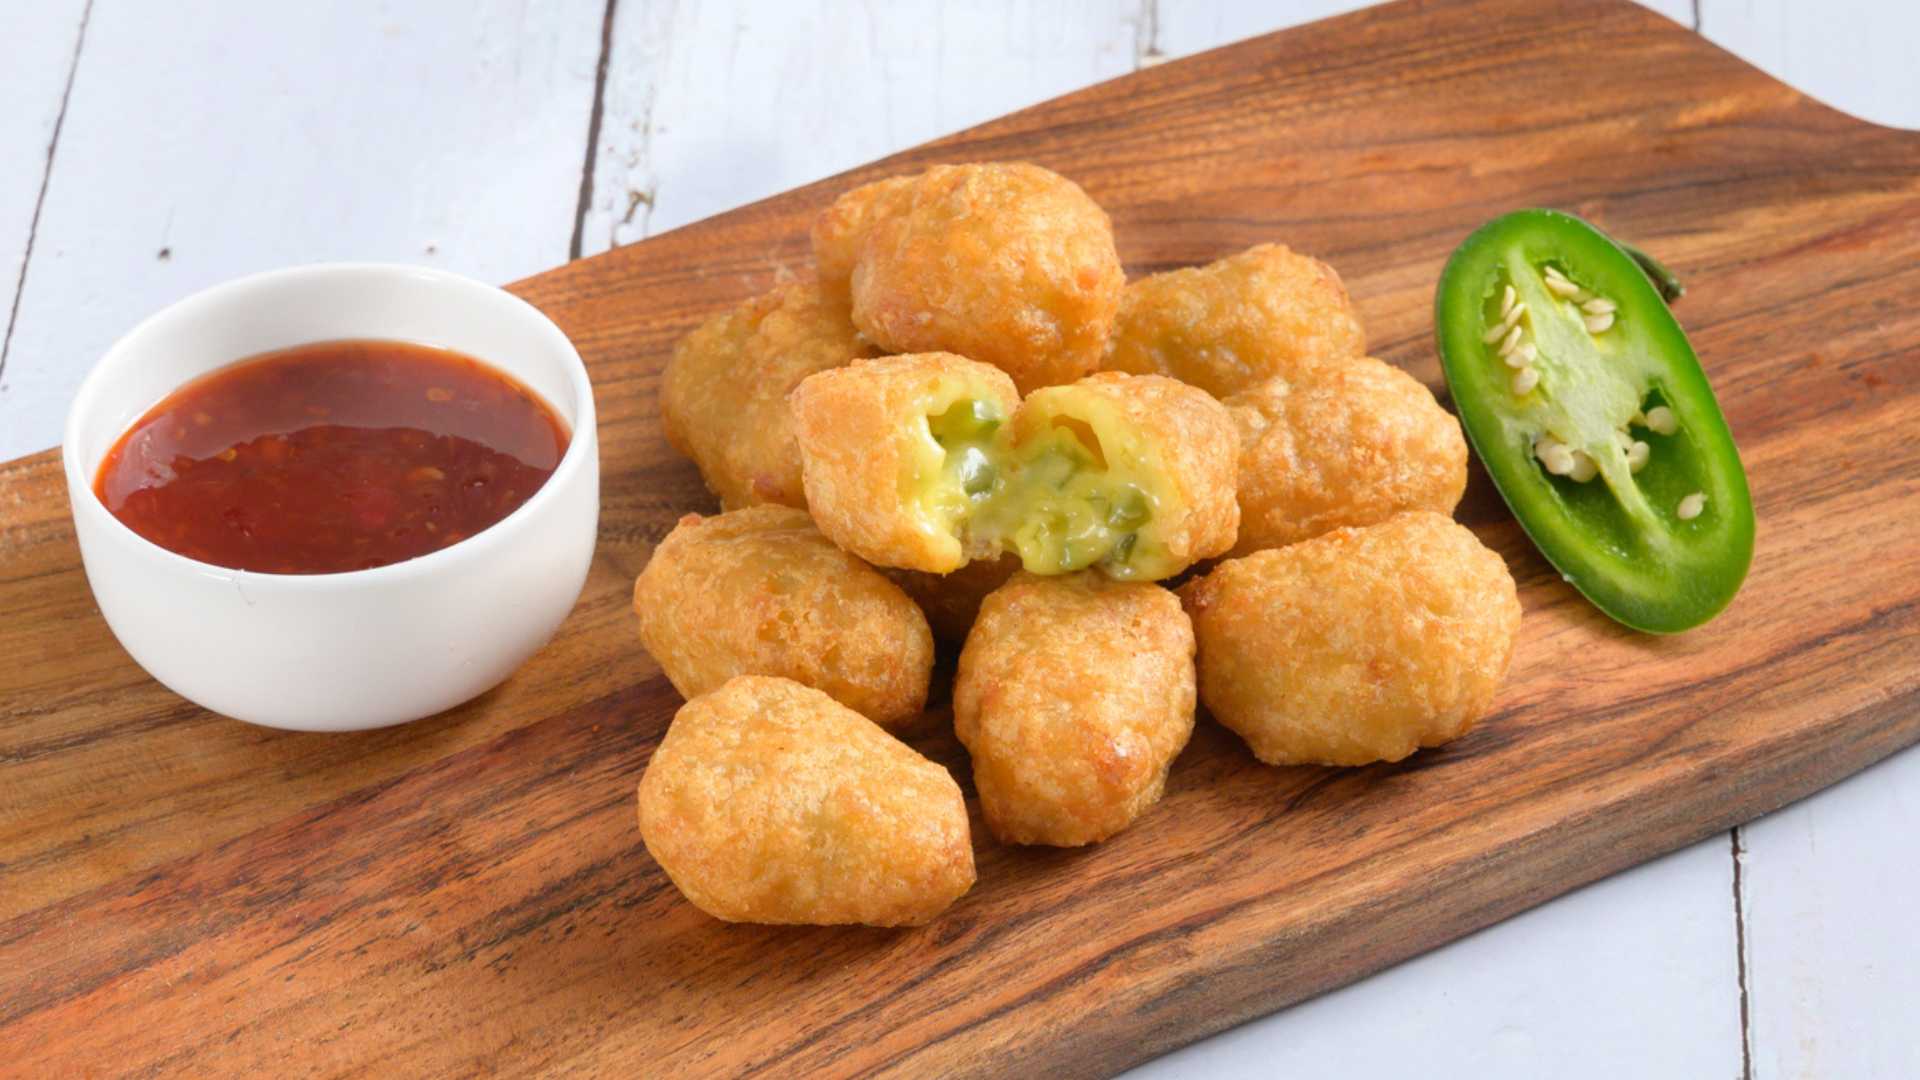 Big Country Chilli Cheese Nuggets